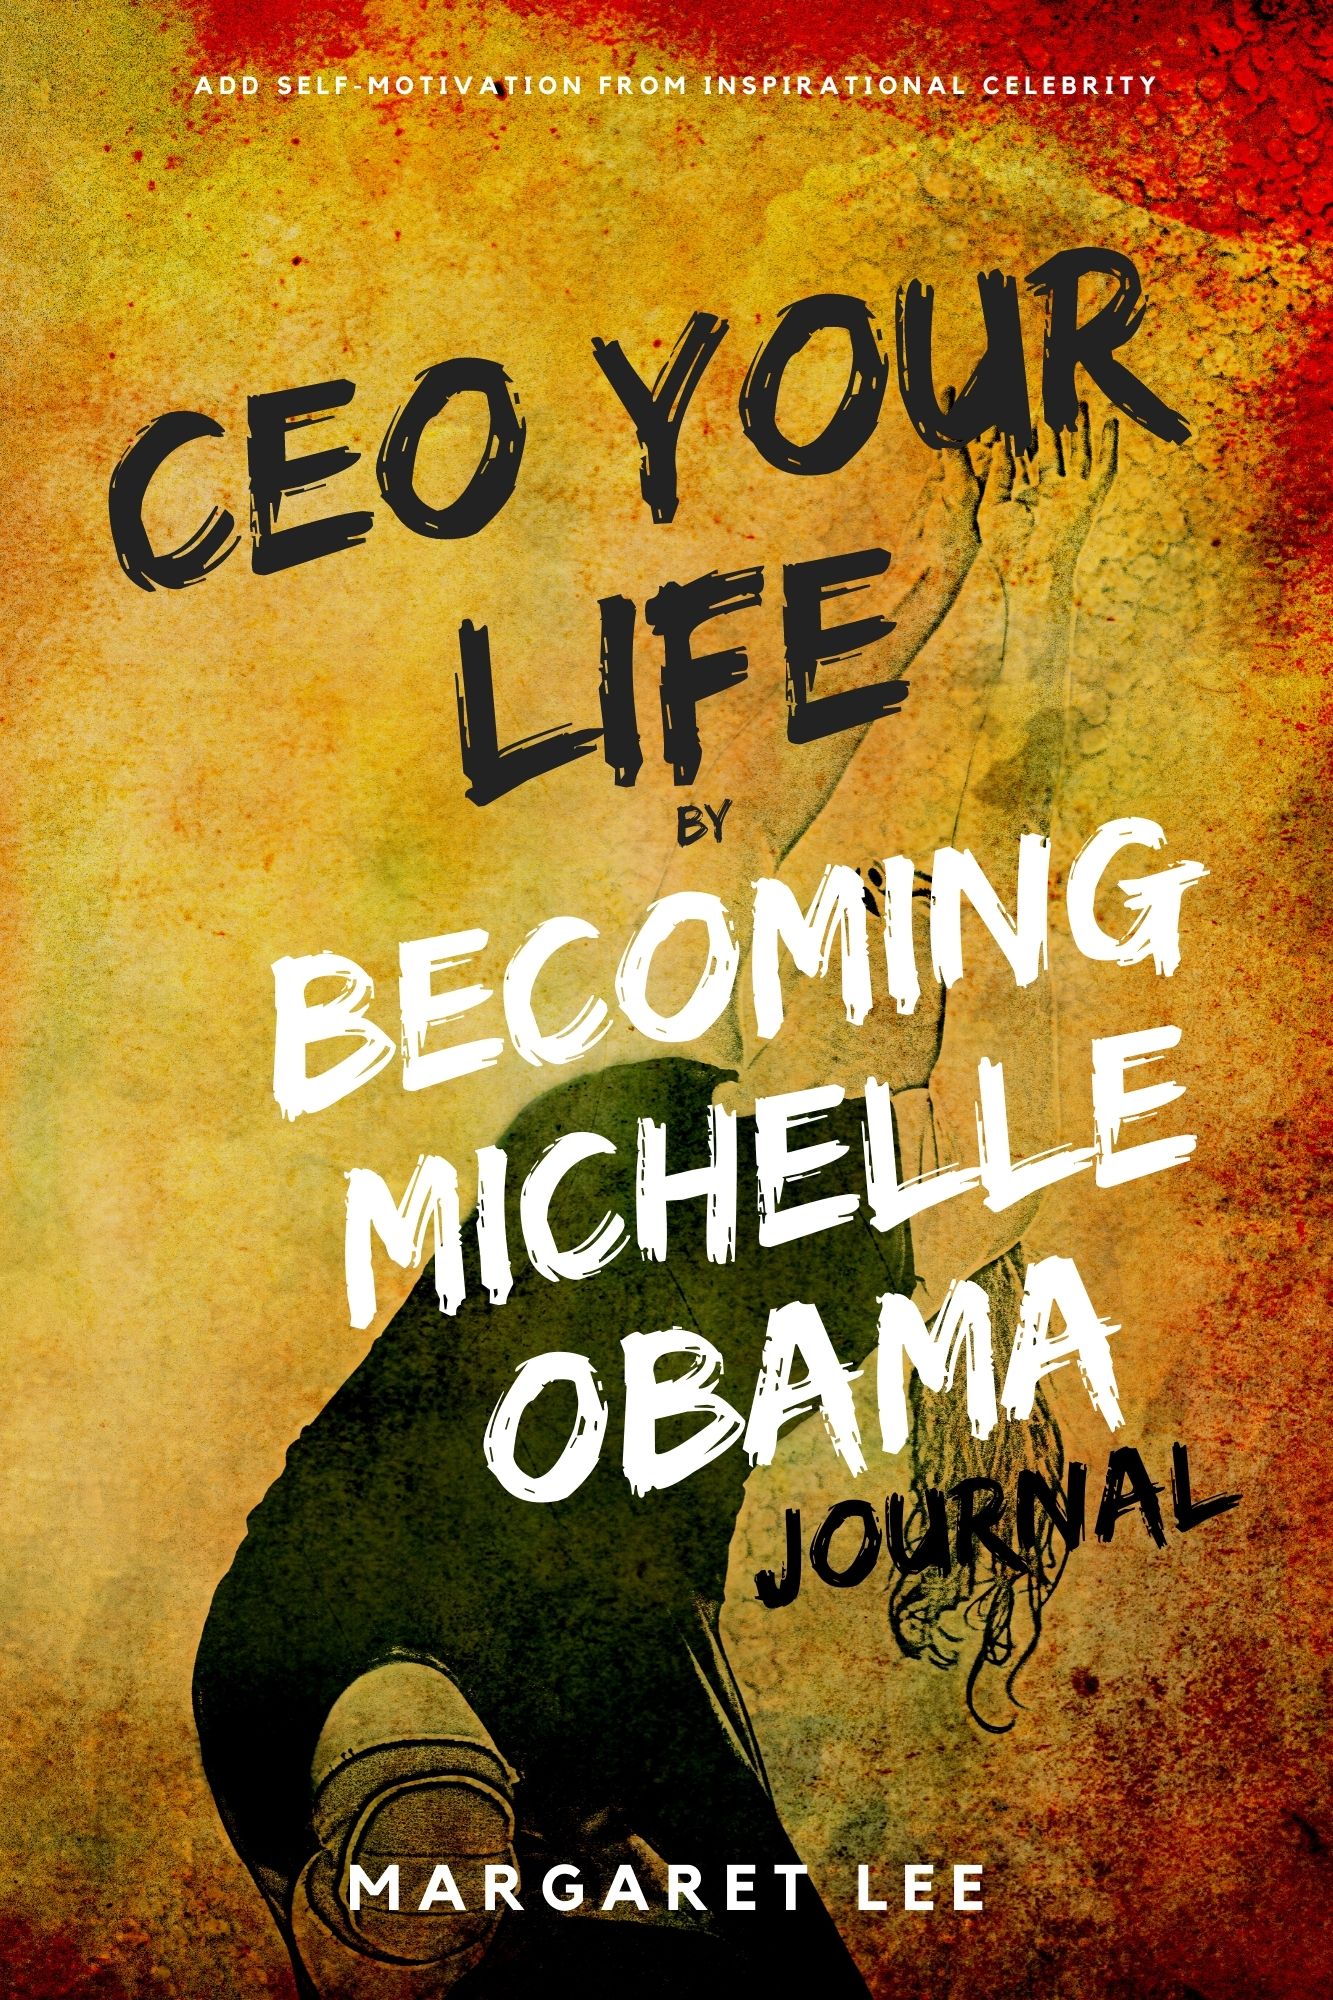 FREE: CEO your life by Becoming Michelle Obama journal by Margaret Lee